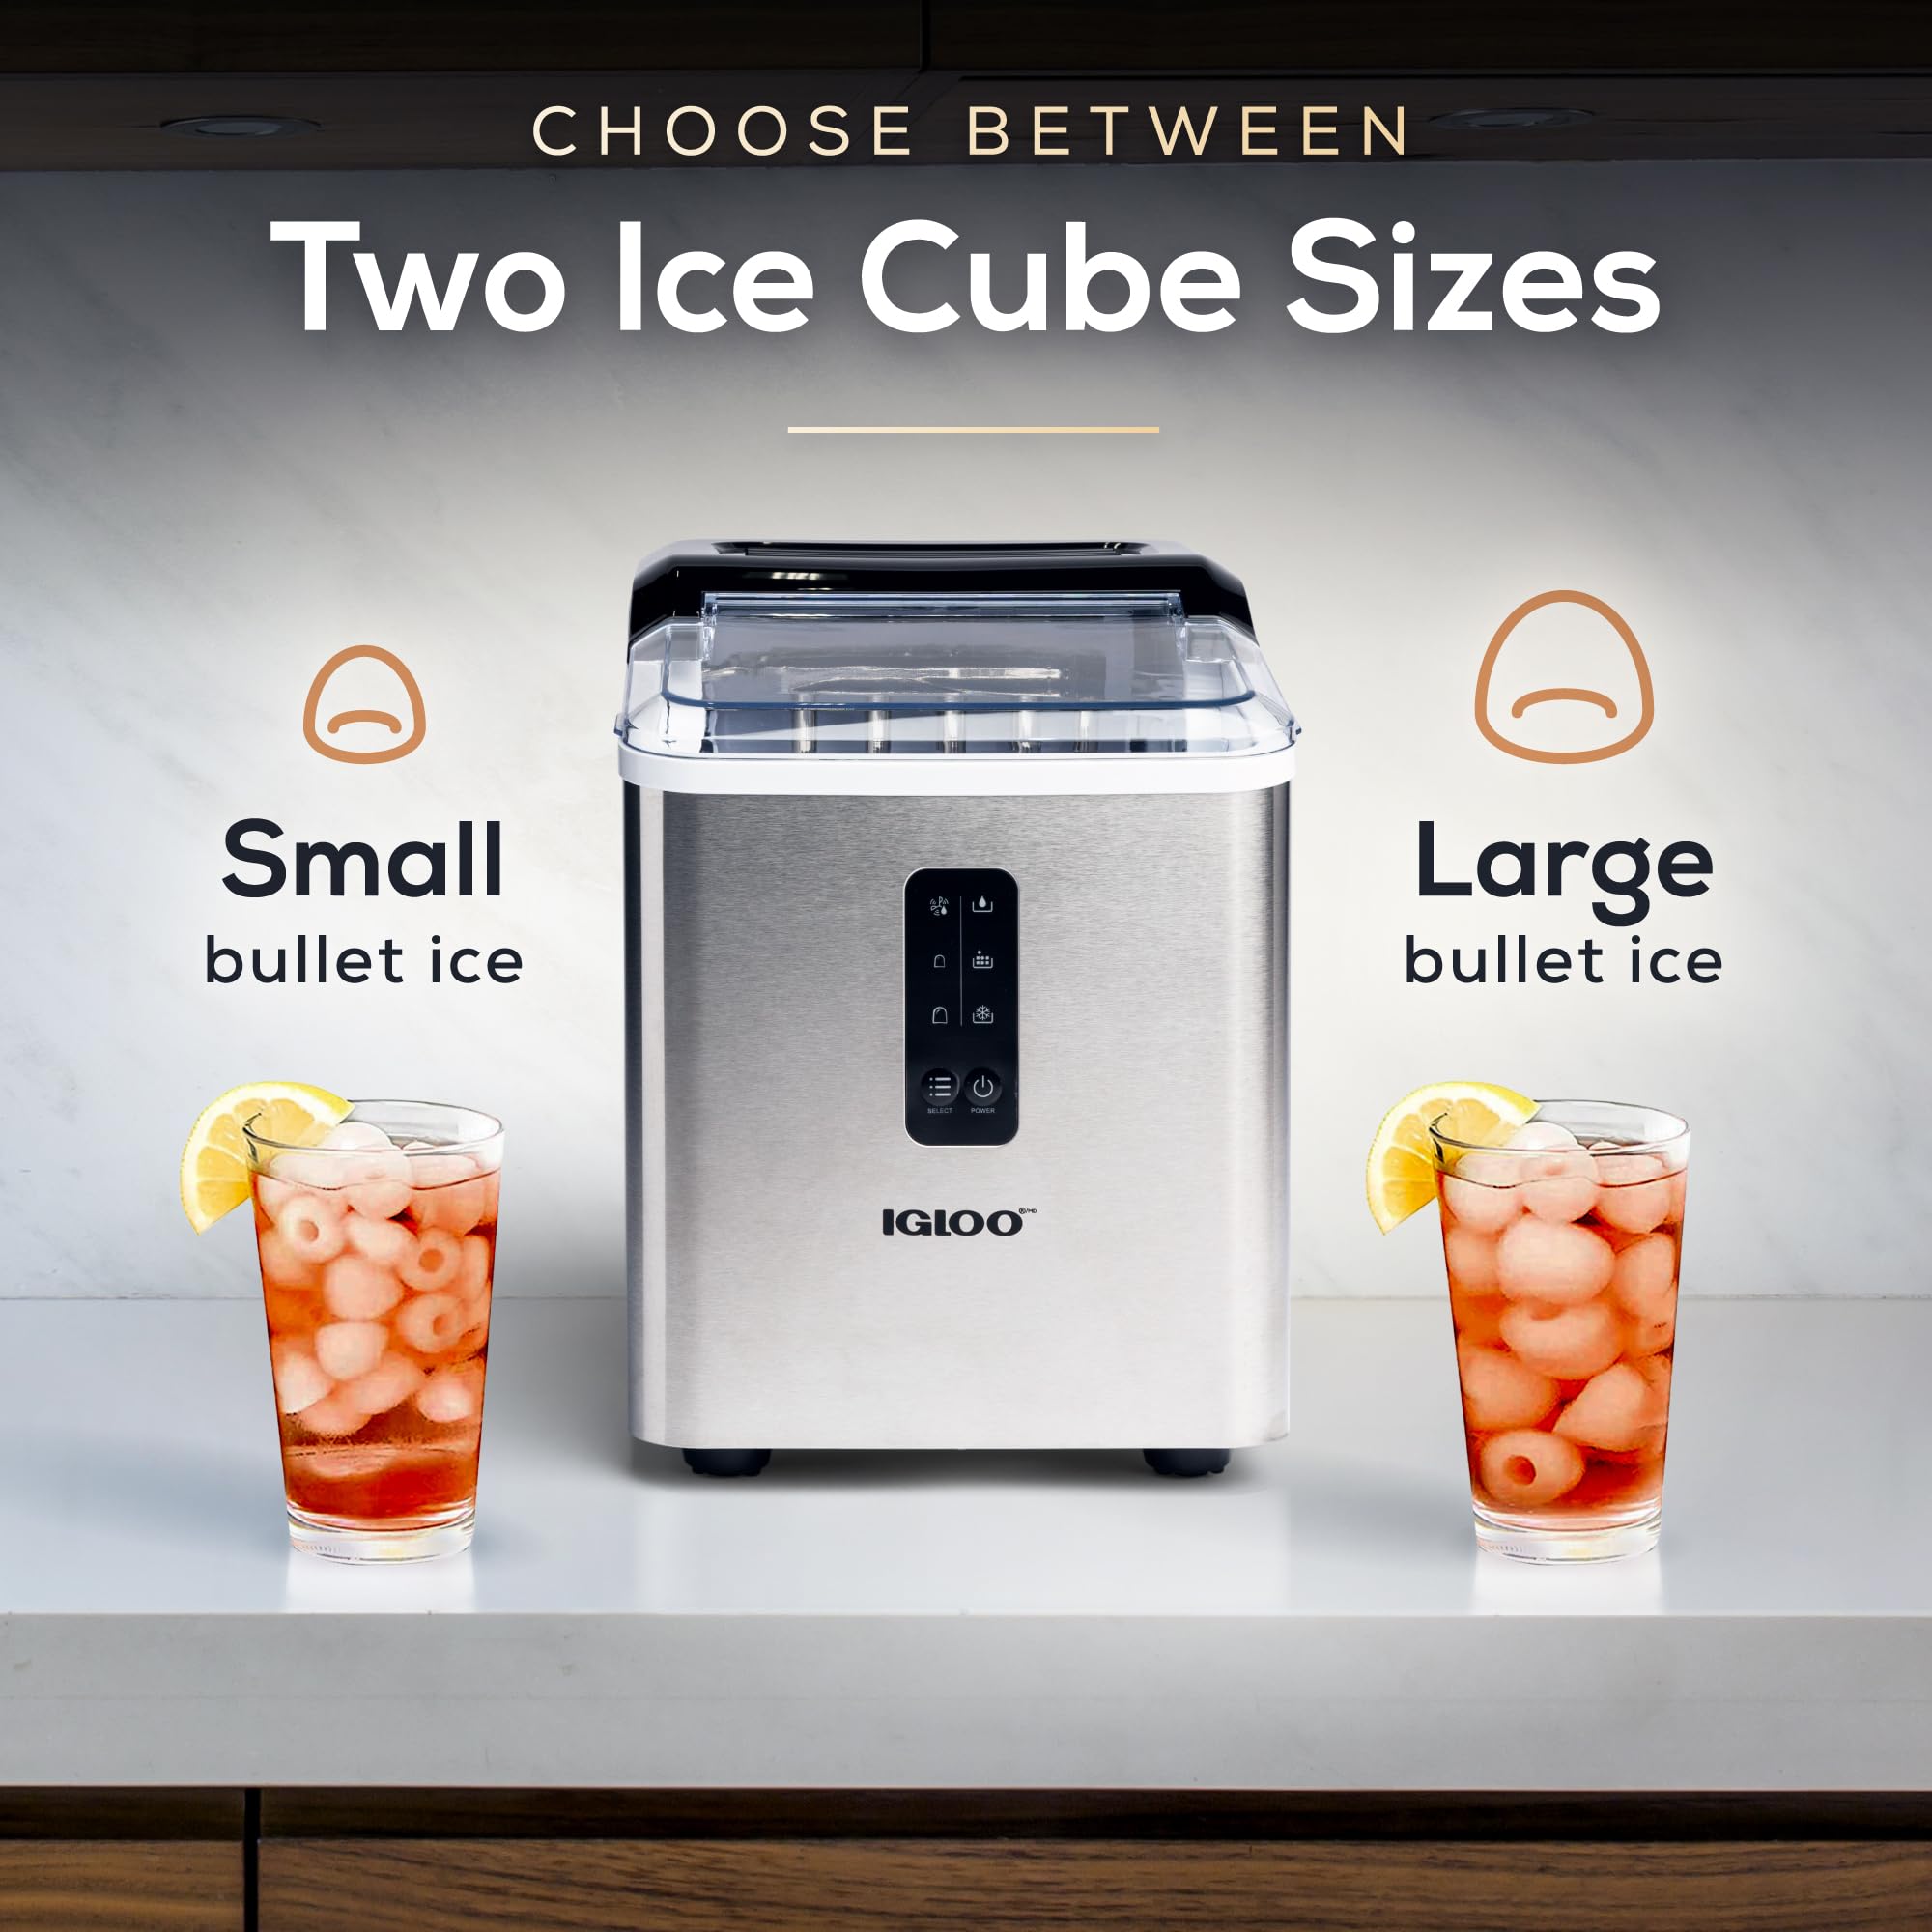 Igloo Automatic Ice Maker, Self- Cleaning, Countertop Size, 26 Pounds in 24 Hours, Cubes 7 Minutes, LED Control Panel, Scoop Included, Perfect for Water Bottles, Mixed Drinks, Stainless Steel